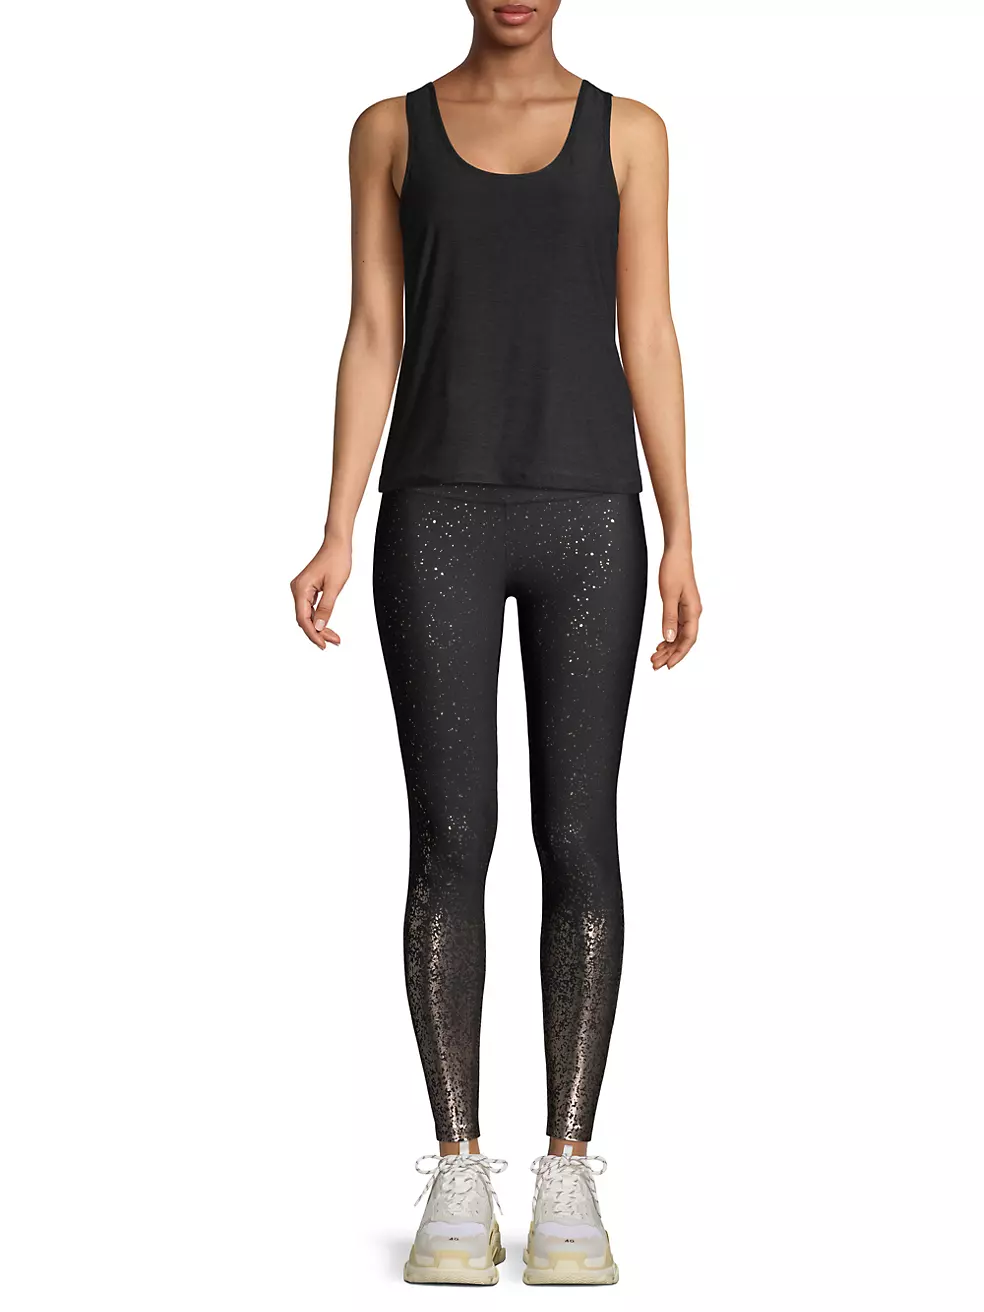 Beyond Yoga Alloy Ombre High-Waisted Midi Leggings Black Iridescent Speckle  